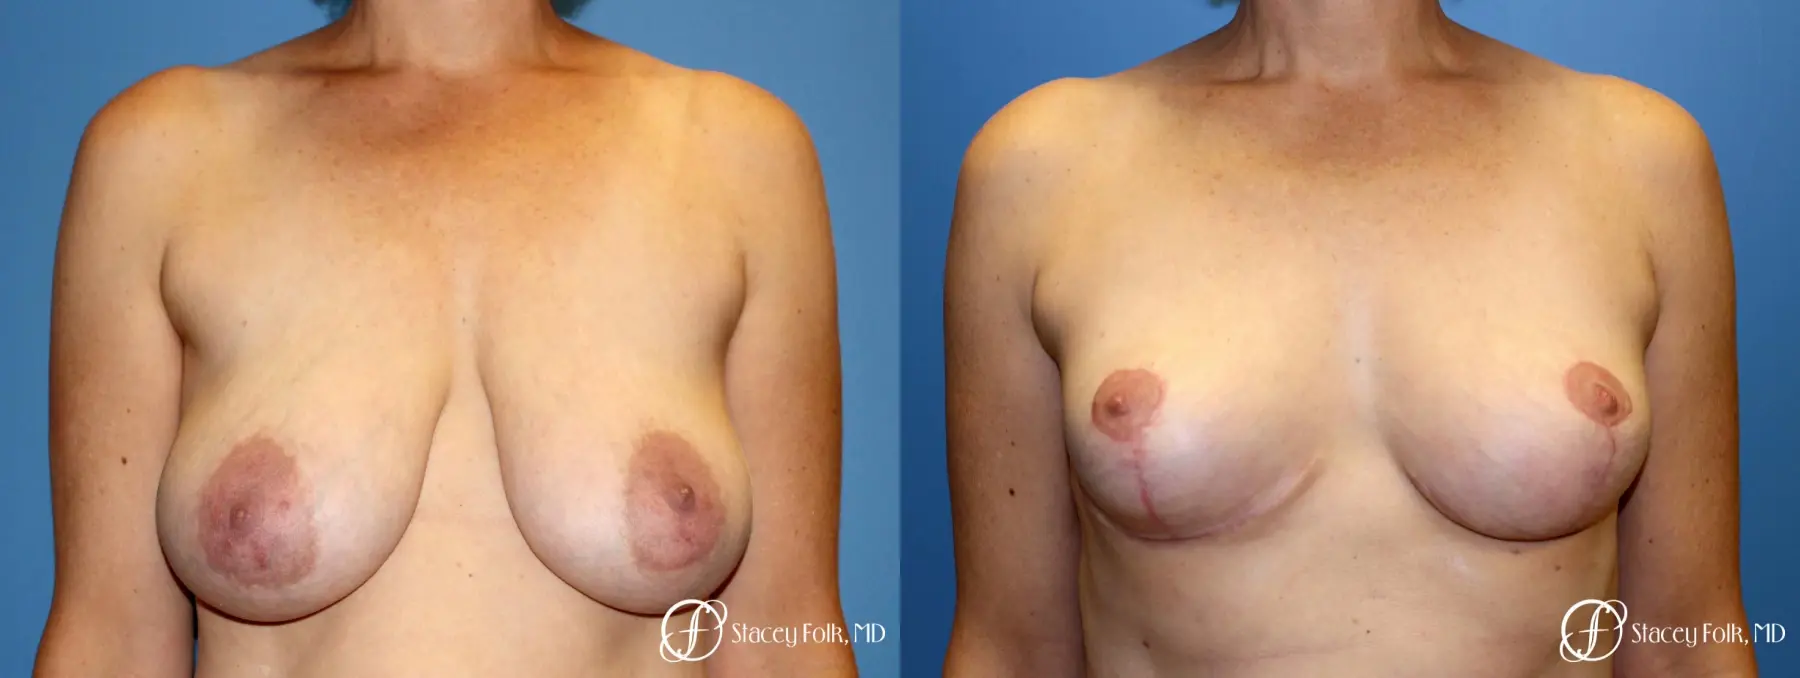 Denver Breast Reduction and Breast Lift - Mastopexy 8231 - Before and After